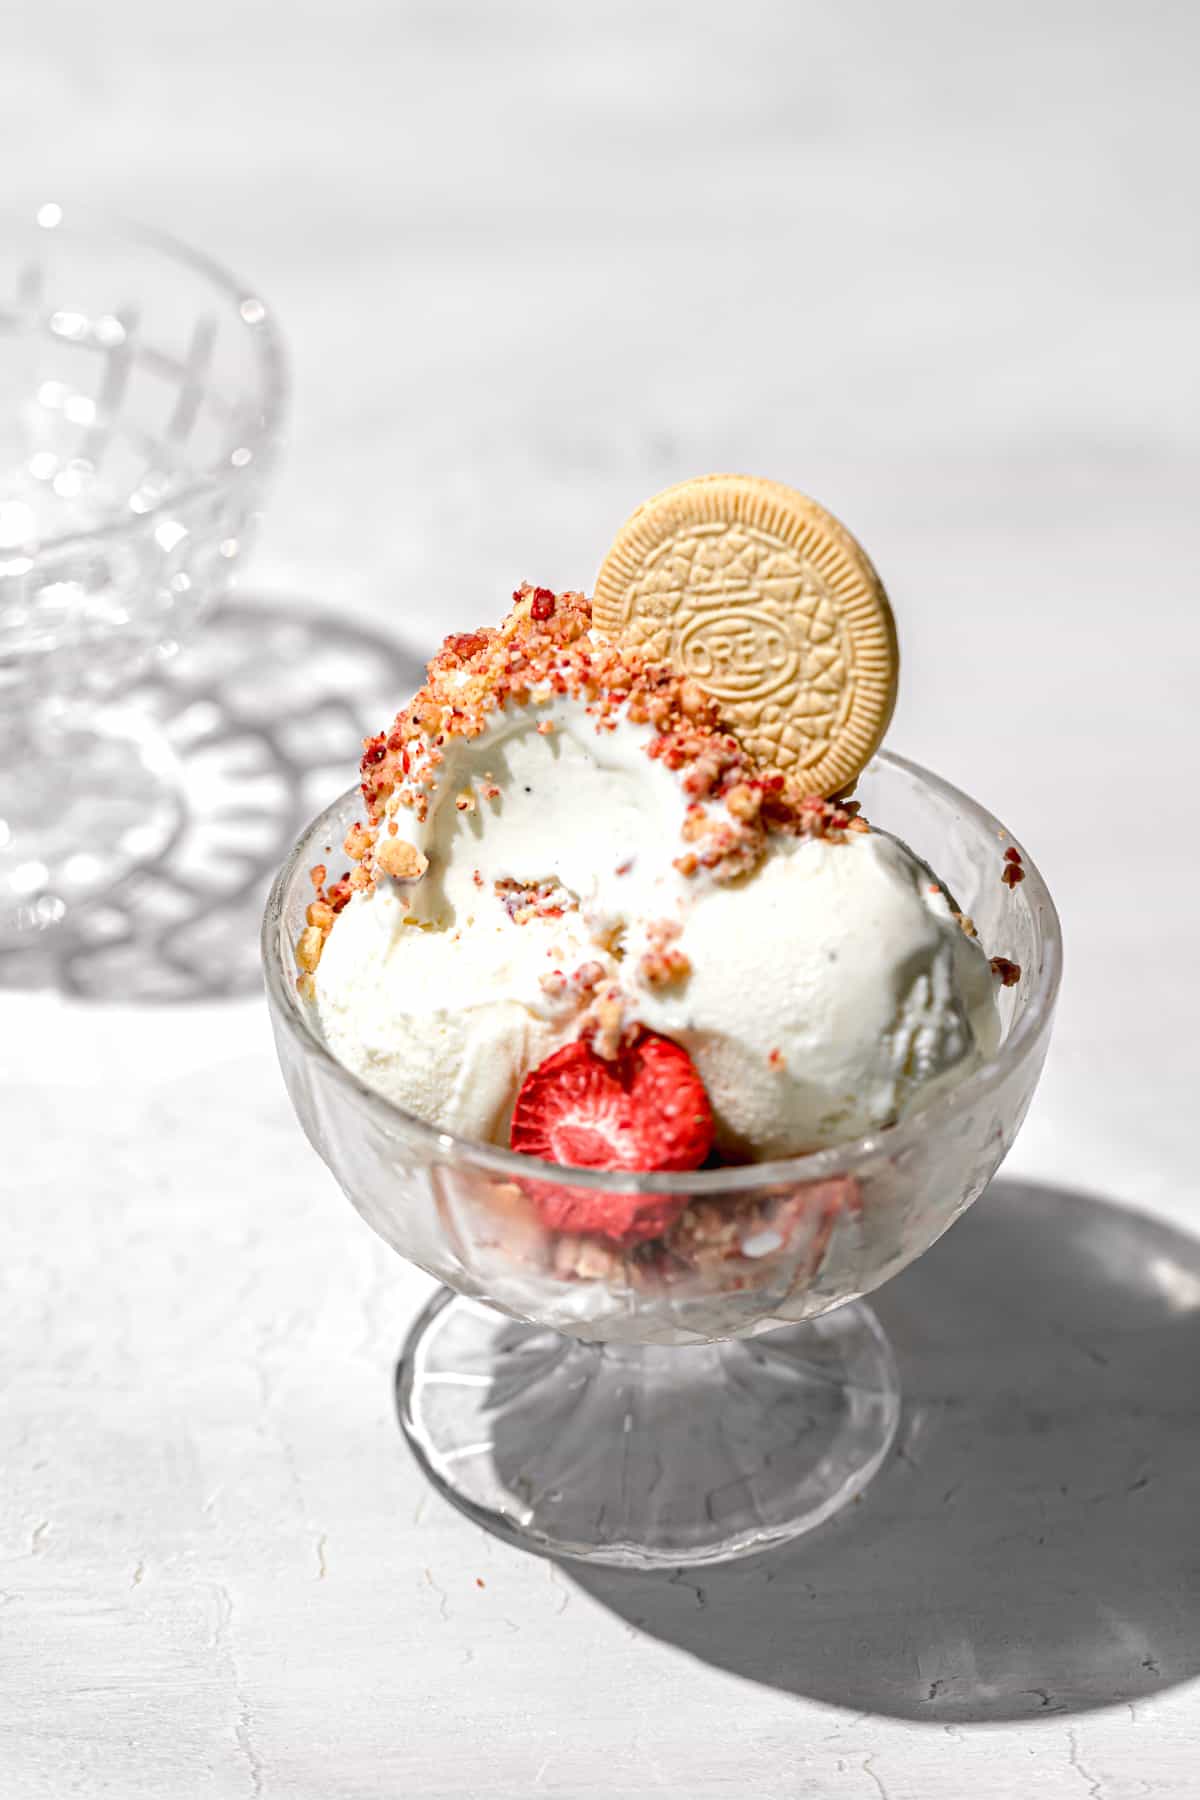 vanilla ice cream topped with strawberry shortcake crumble and golden oreo in glass bowl.